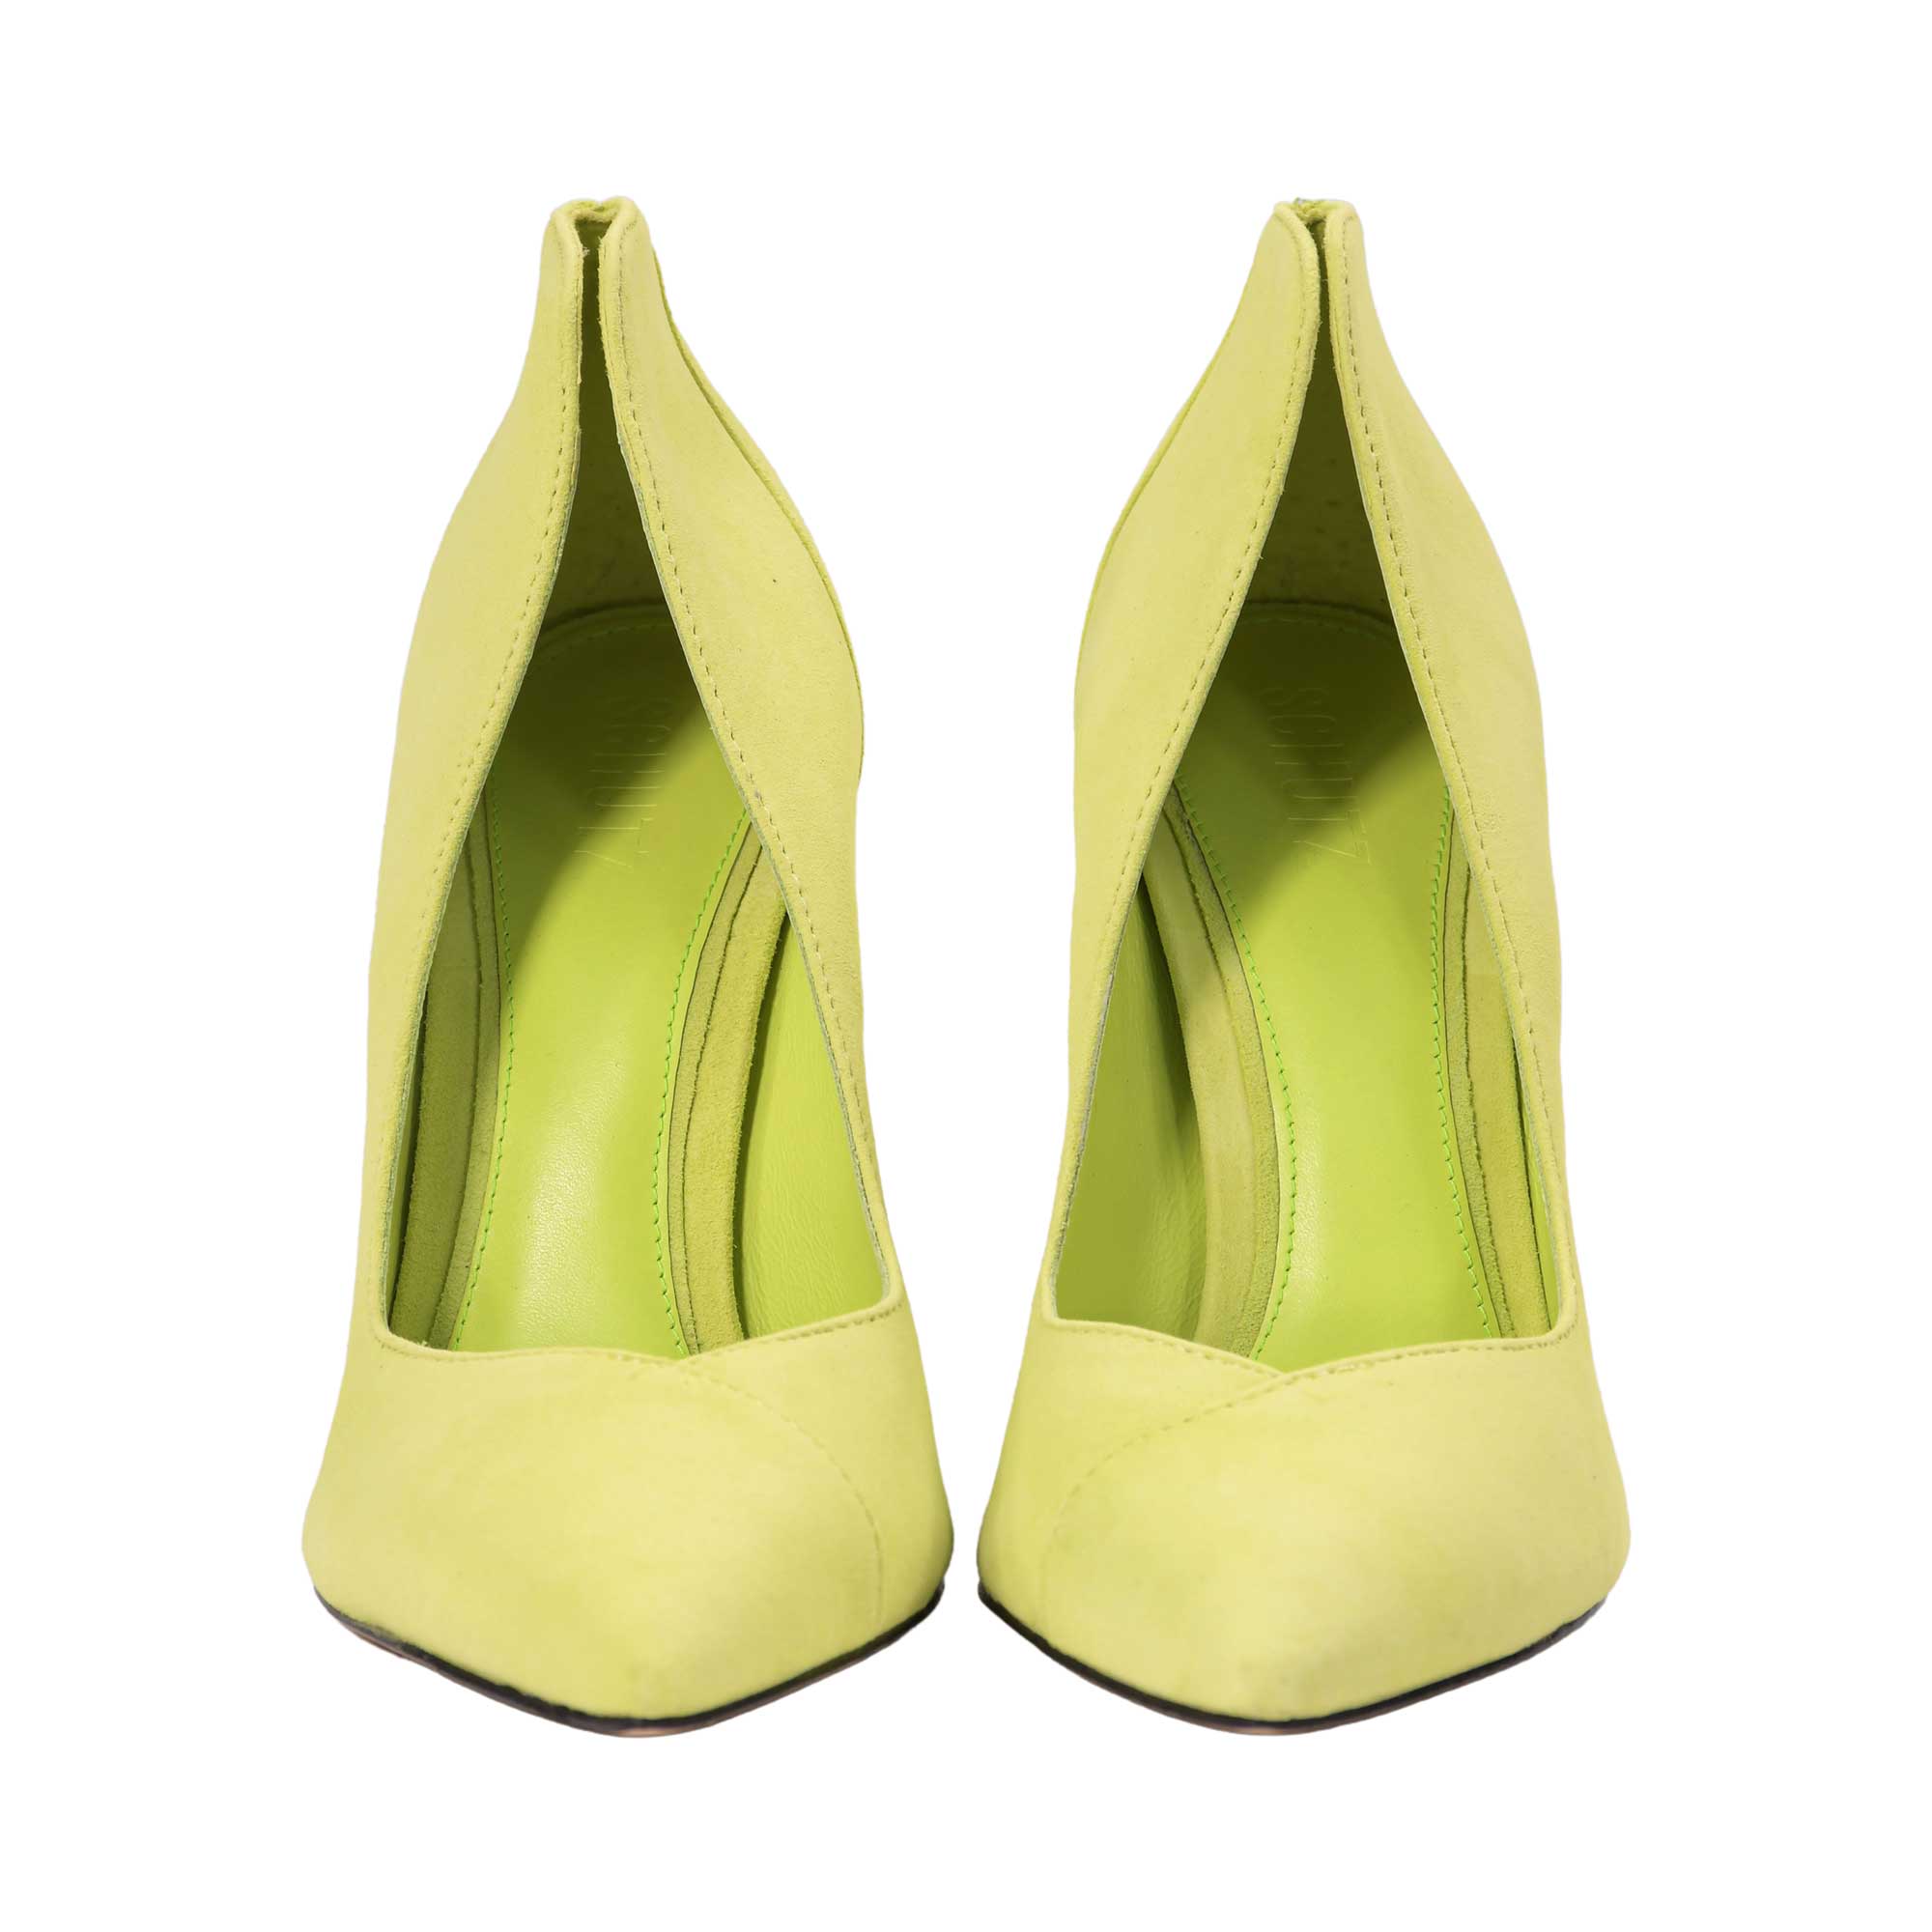 Buy Neon Green Heeled Sandals for Women by MFT Couture Online | Ajio.com